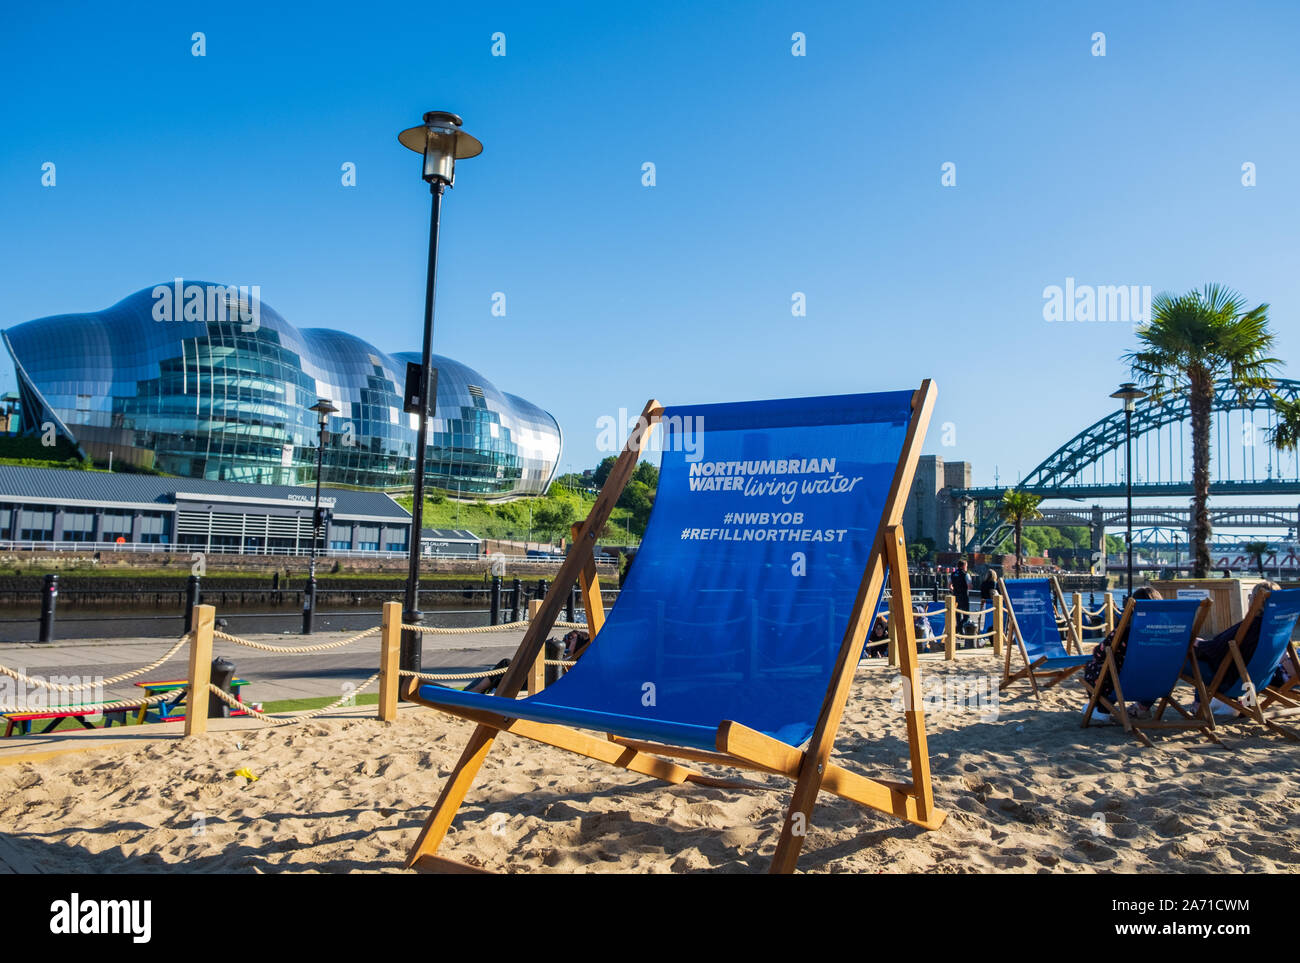 Newcastle, United Kingdom -June 27, 2019: Artificial beach setting with sand and beach chairs on a beautiful summer afternoon at Newcastle Quayside Stock Photo